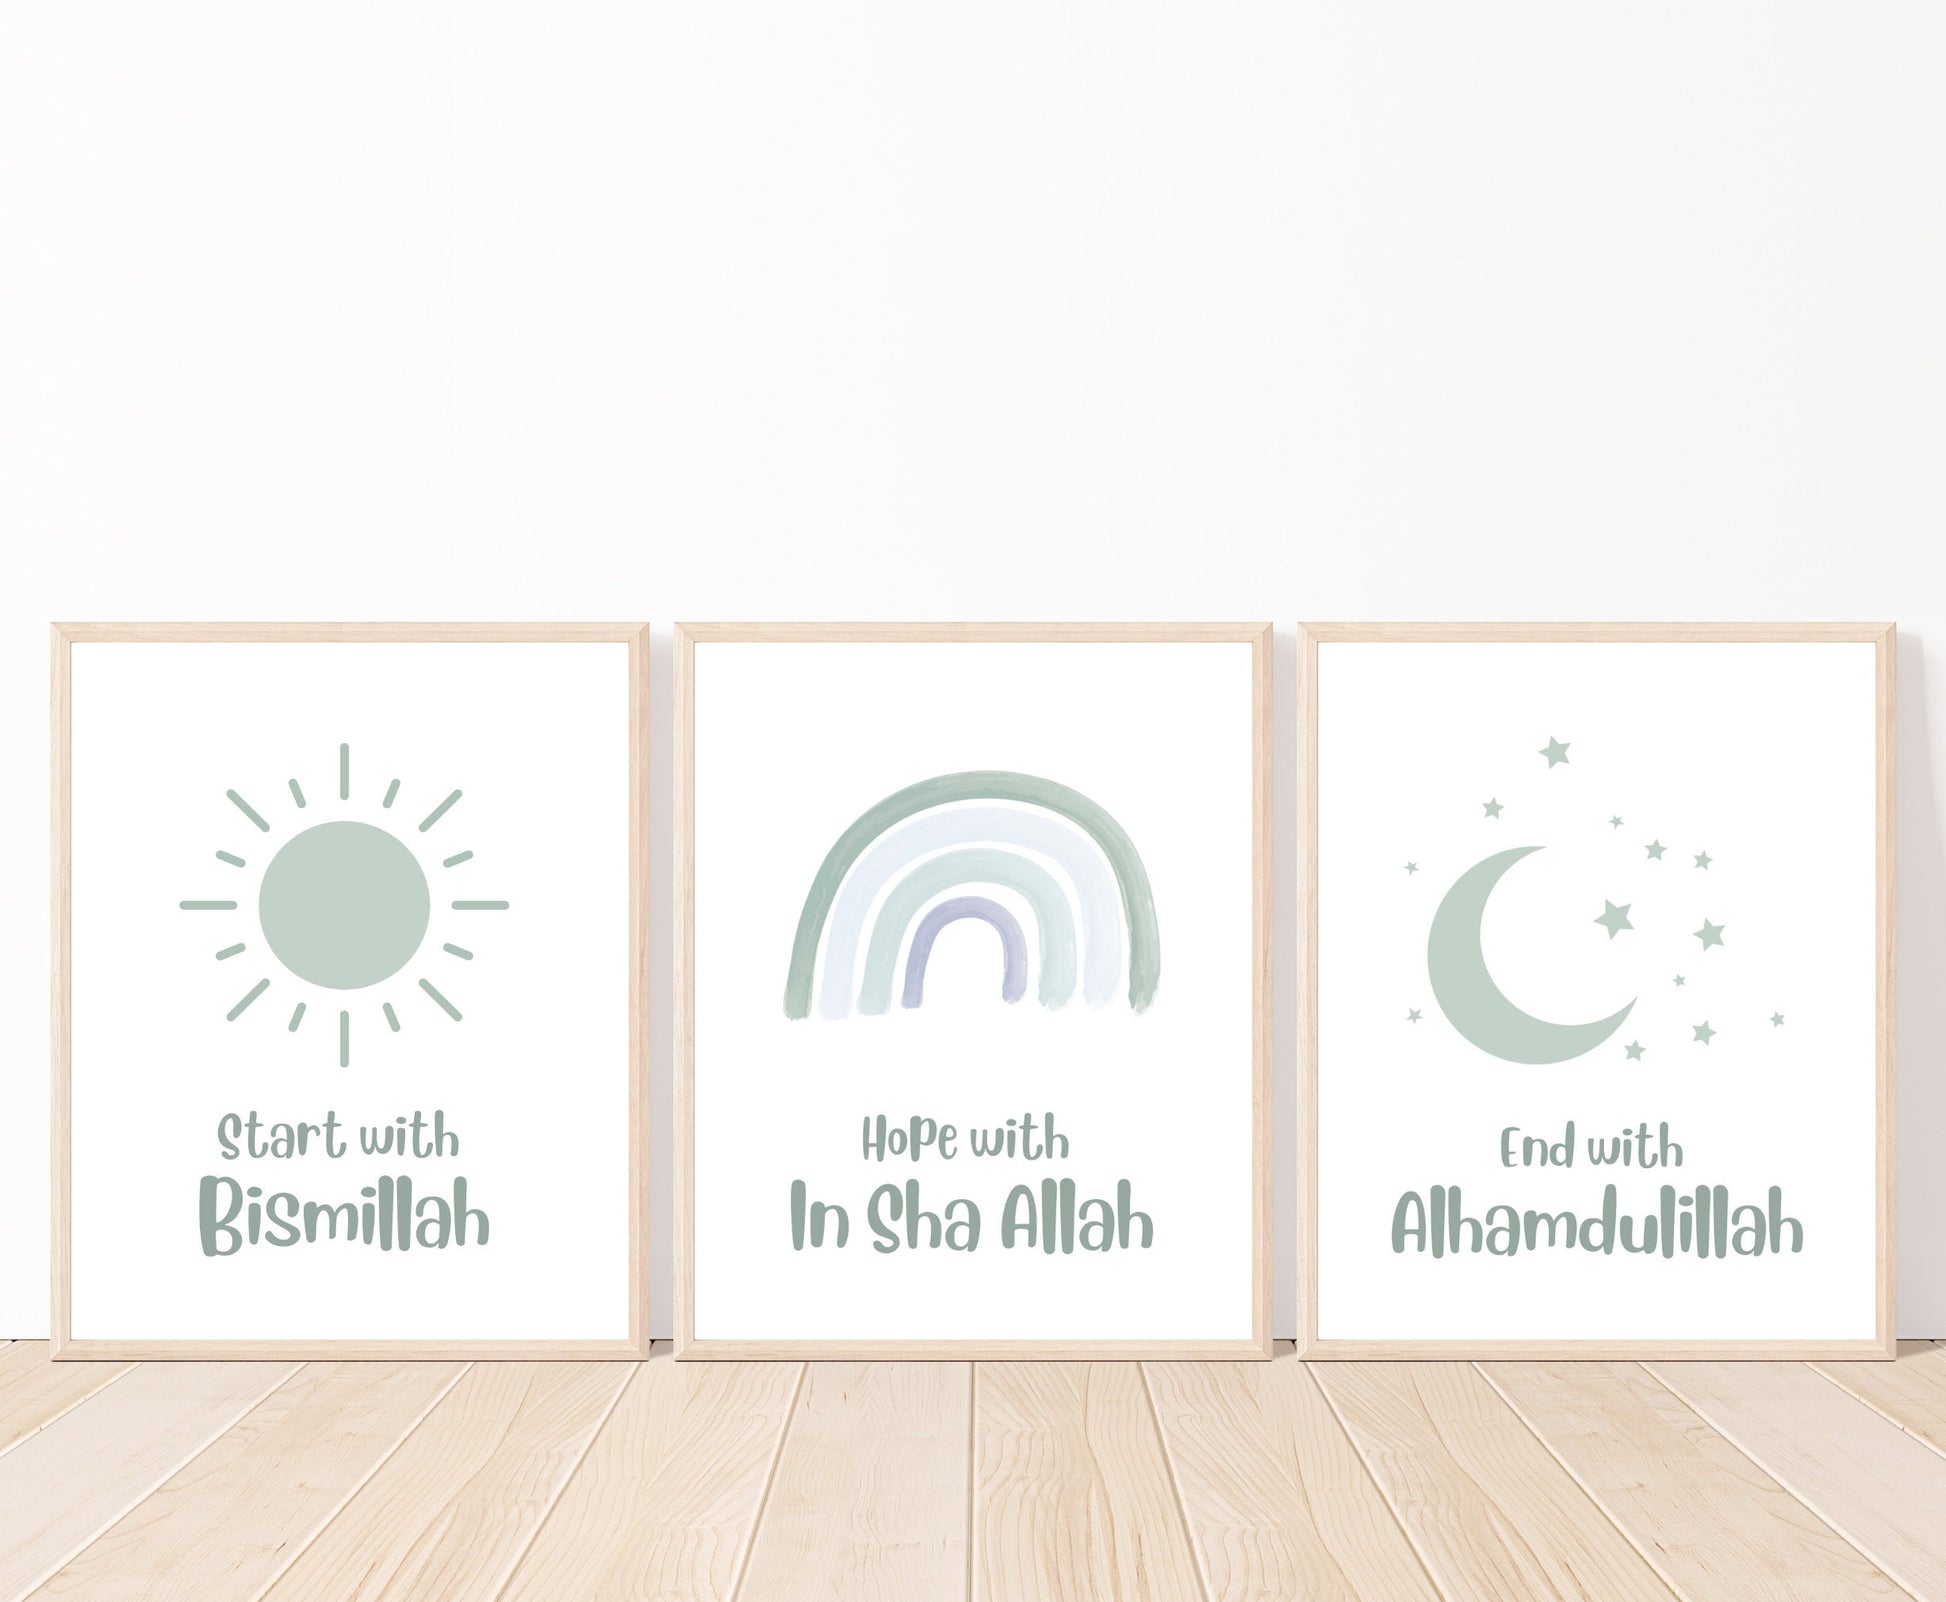 An image showing three digital print graphics that are placed on a white wall and parquet flooring. The first one shows a baby green sun with “Start with Bismillah” written in the same color, right below. The middle graphic is a baby green rainbow with “Hope with In Sha Allah” written just below it. The last frame shows a graphic of a baby green crescent and some tiny stars in the same color with “End with Alhamdulillah” written just below the latter.